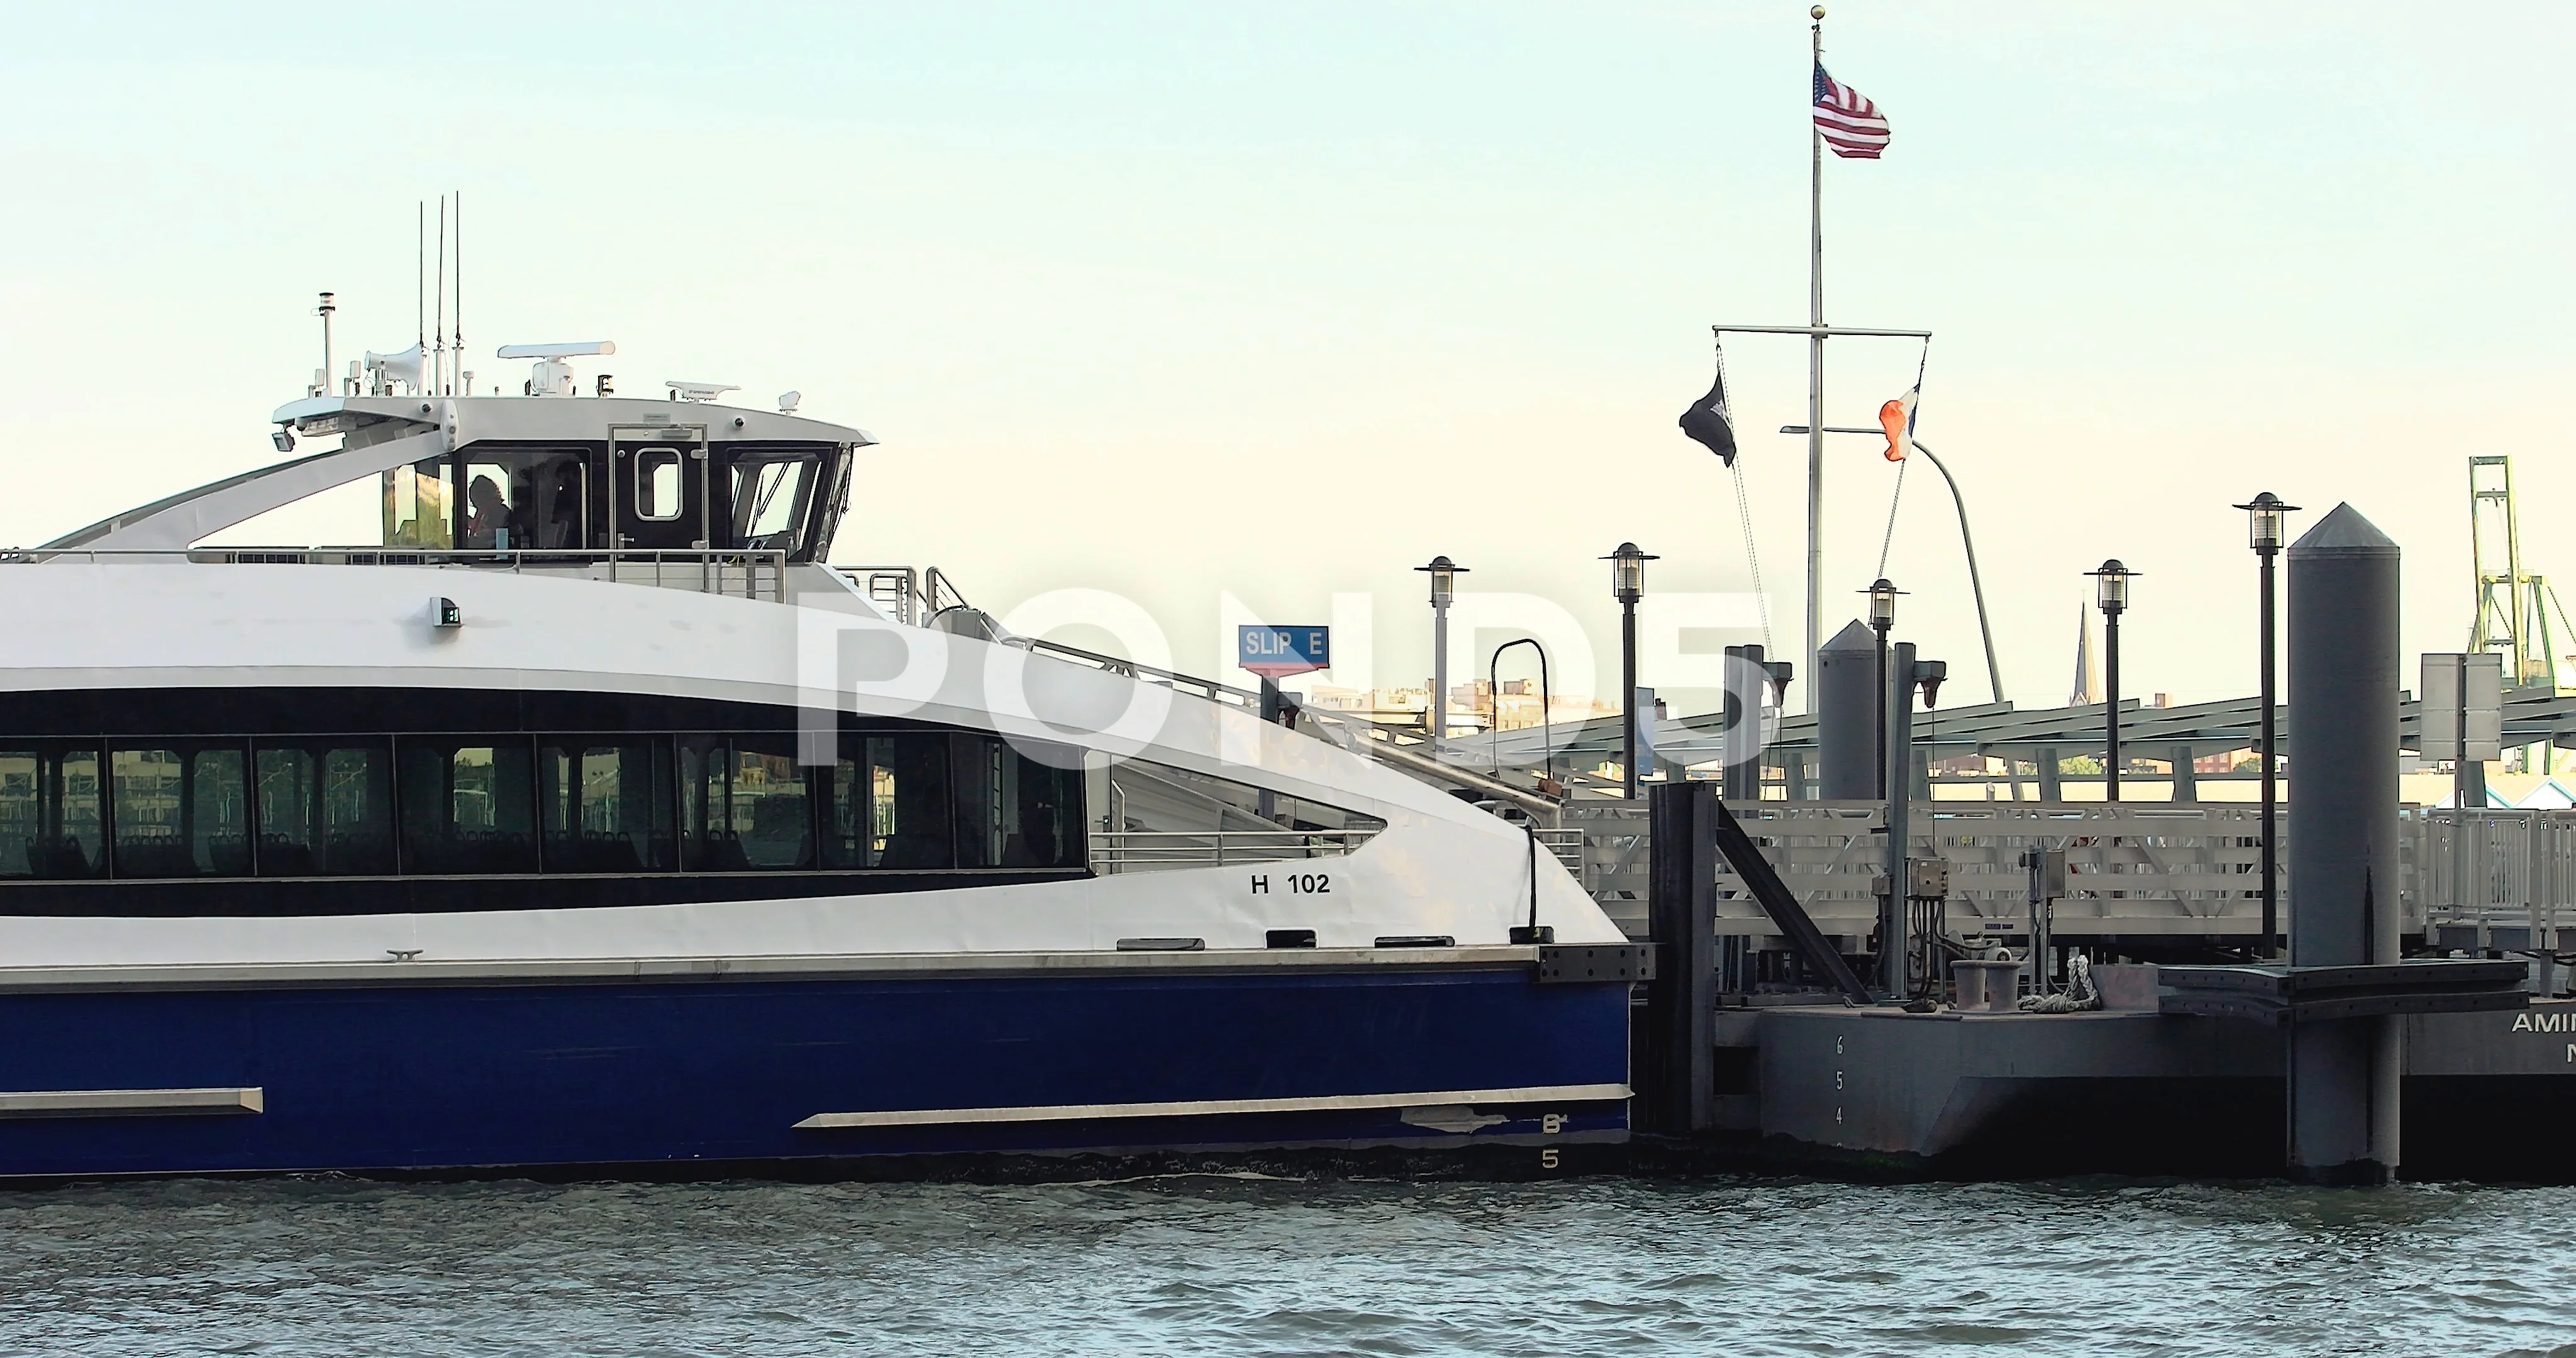 video: ny waterway passenger ferry boat docked on hudson river